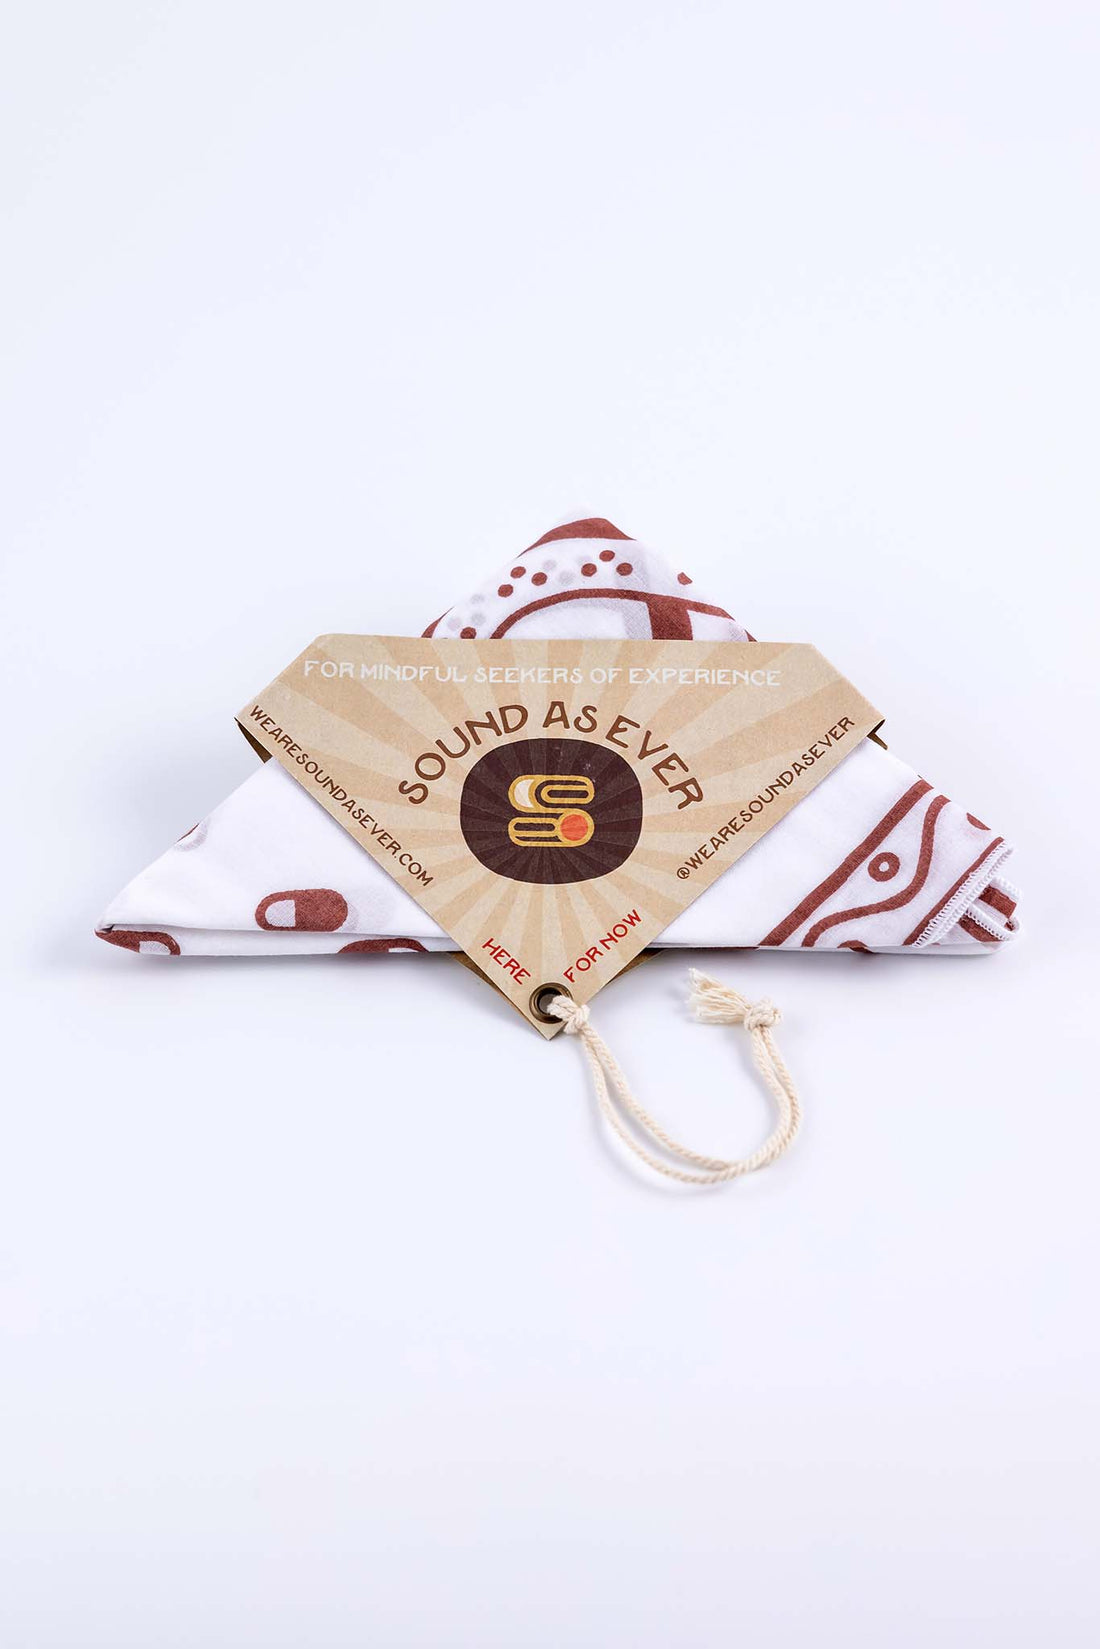 Organic cotton bandana white with red design of the "Sinner Seeker" and folded in a triangle with packaging showing Sound As Ever logo